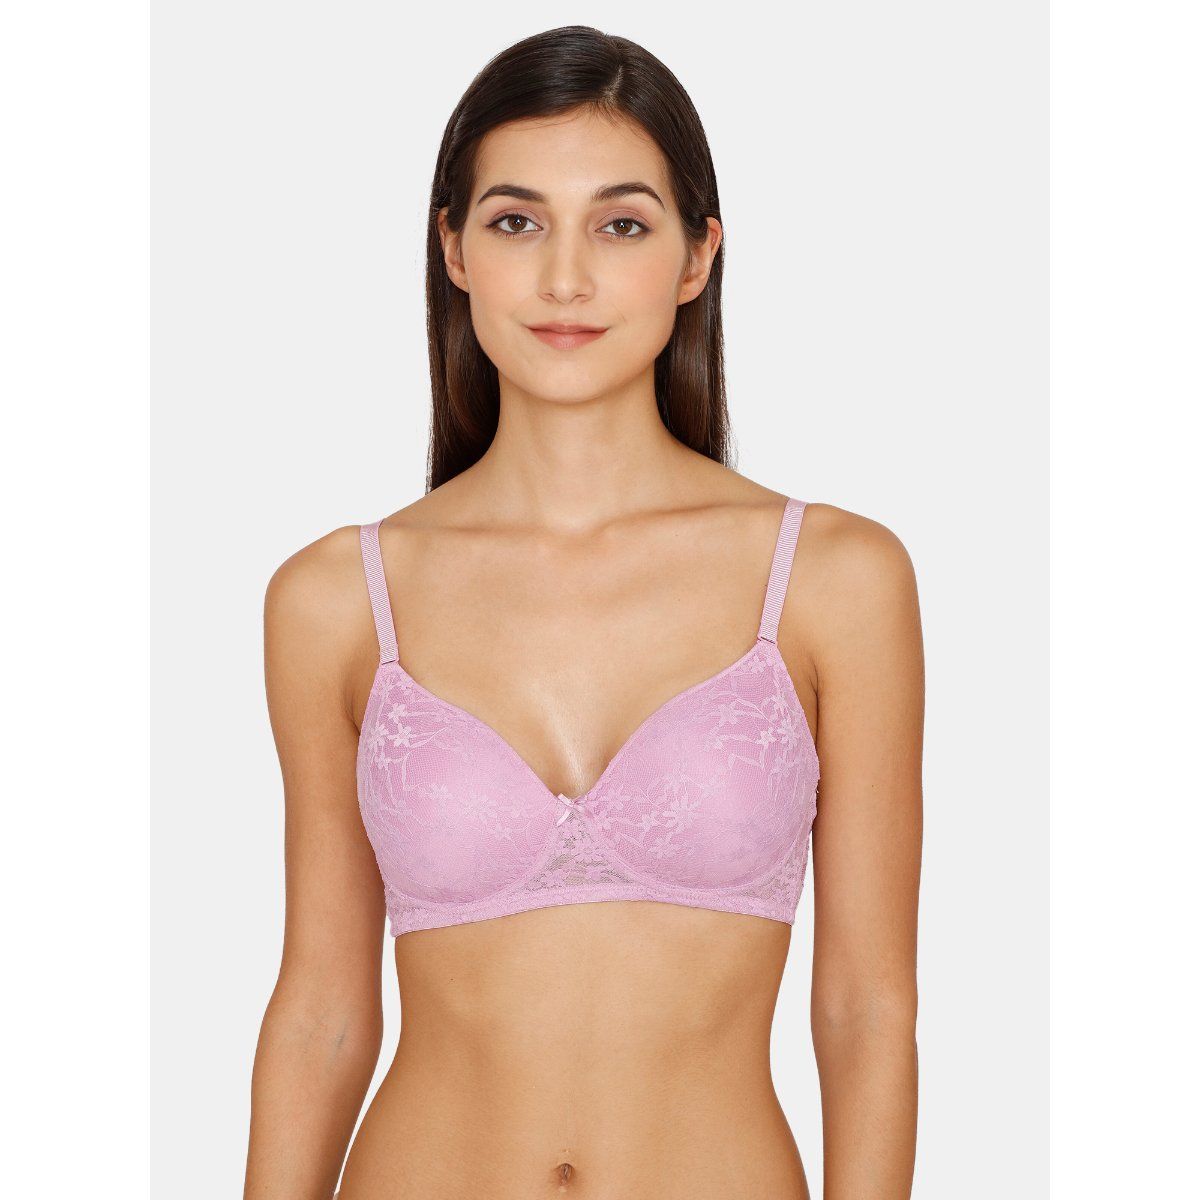 Zivame Padded Non Wired 3-4th Coverage Lace Bra - Violet Tulle (32D)